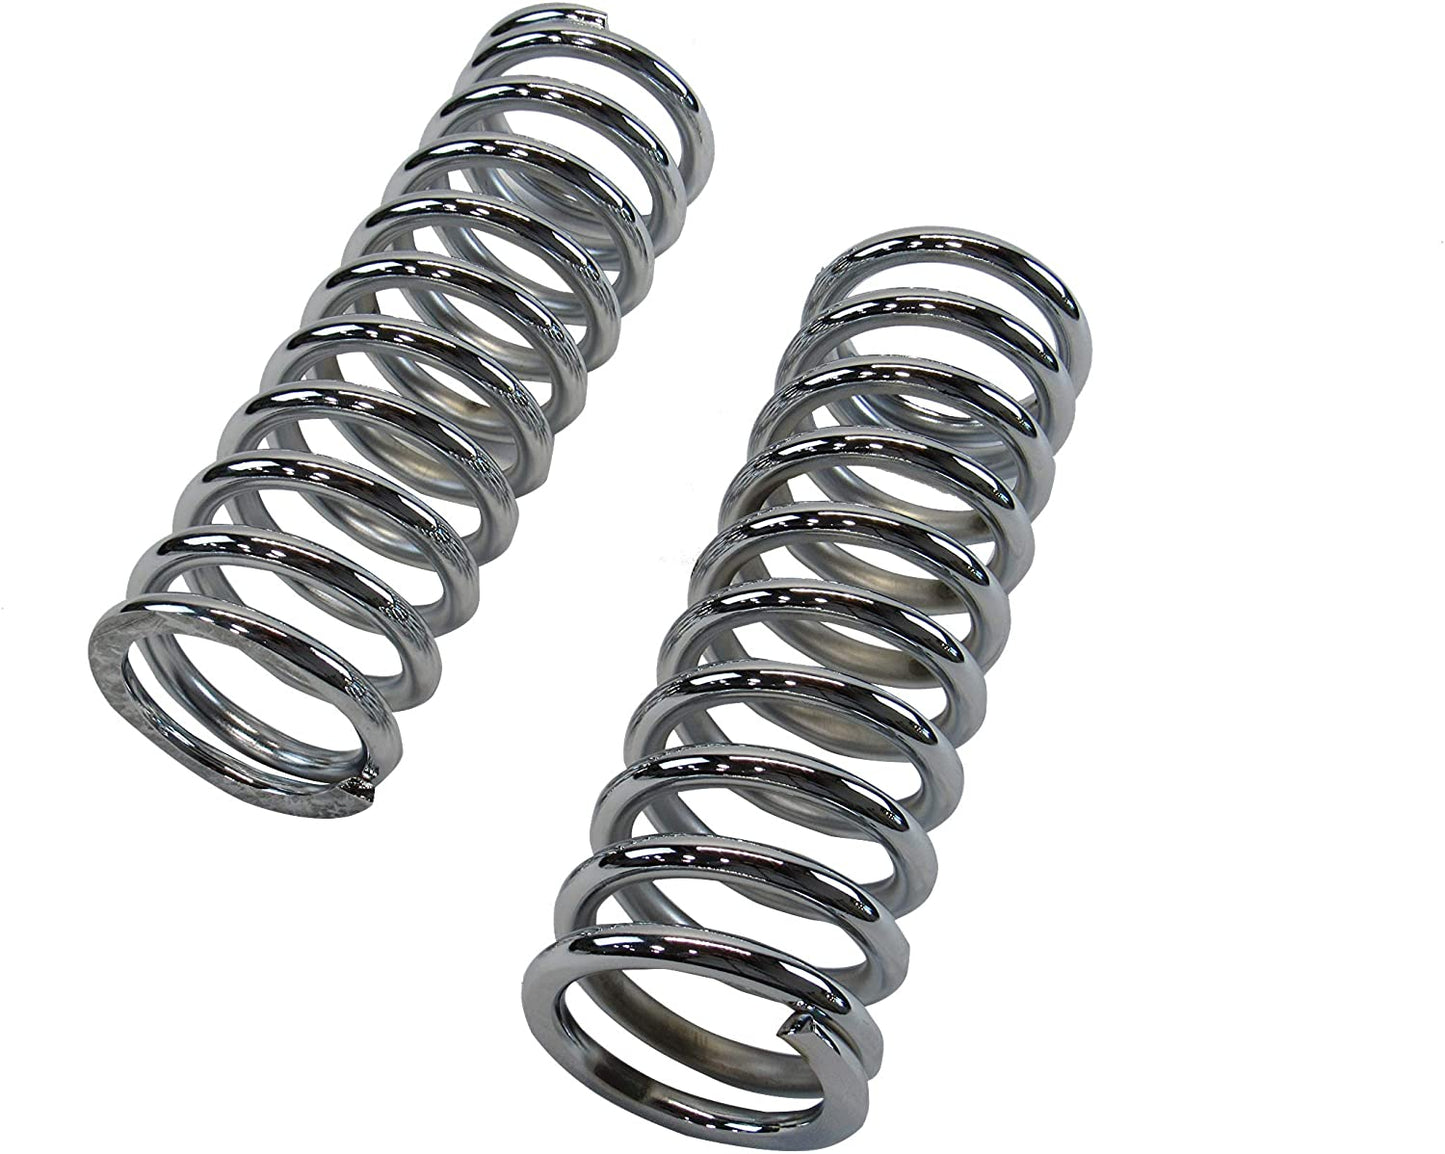 10" Tall Coil Over Shock Springs, ID: 2.5", Rate: 150lb, Chrome